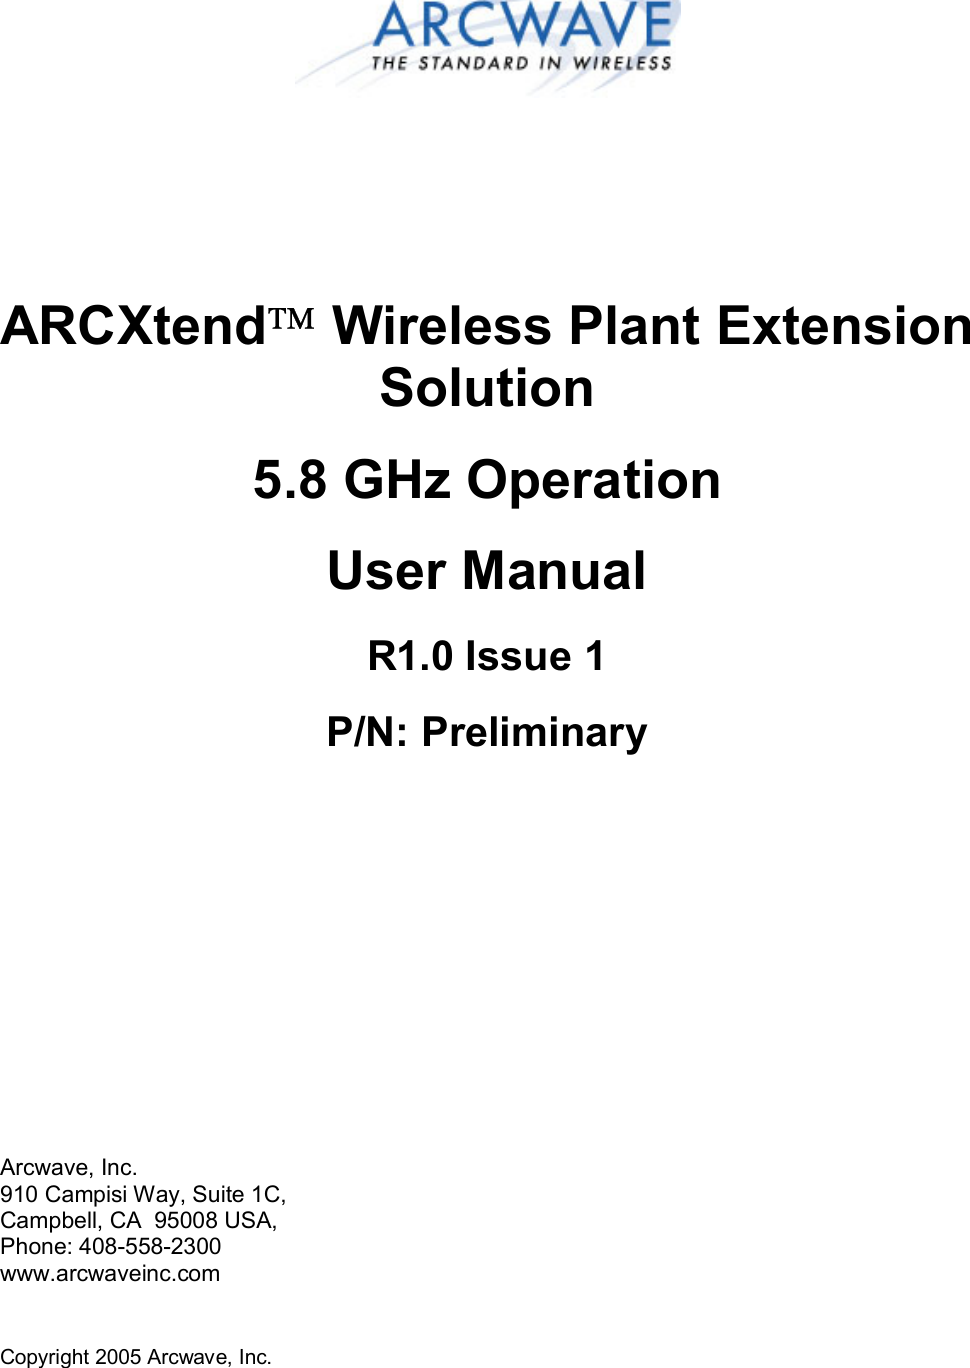 Copyright 2005 Arcwave, Inc.      ARCXtend Wireless Plant Extension Solution 5.8 GHz Operation User Manual R1.0 Issue 1 P/N: Preliminary               Arcwave, Inc. 910 Campisi Way, Suite 1C,  Campbell, CA  95008 USA,  Phone: 408-558-2300 www.arcwaveinc.com 